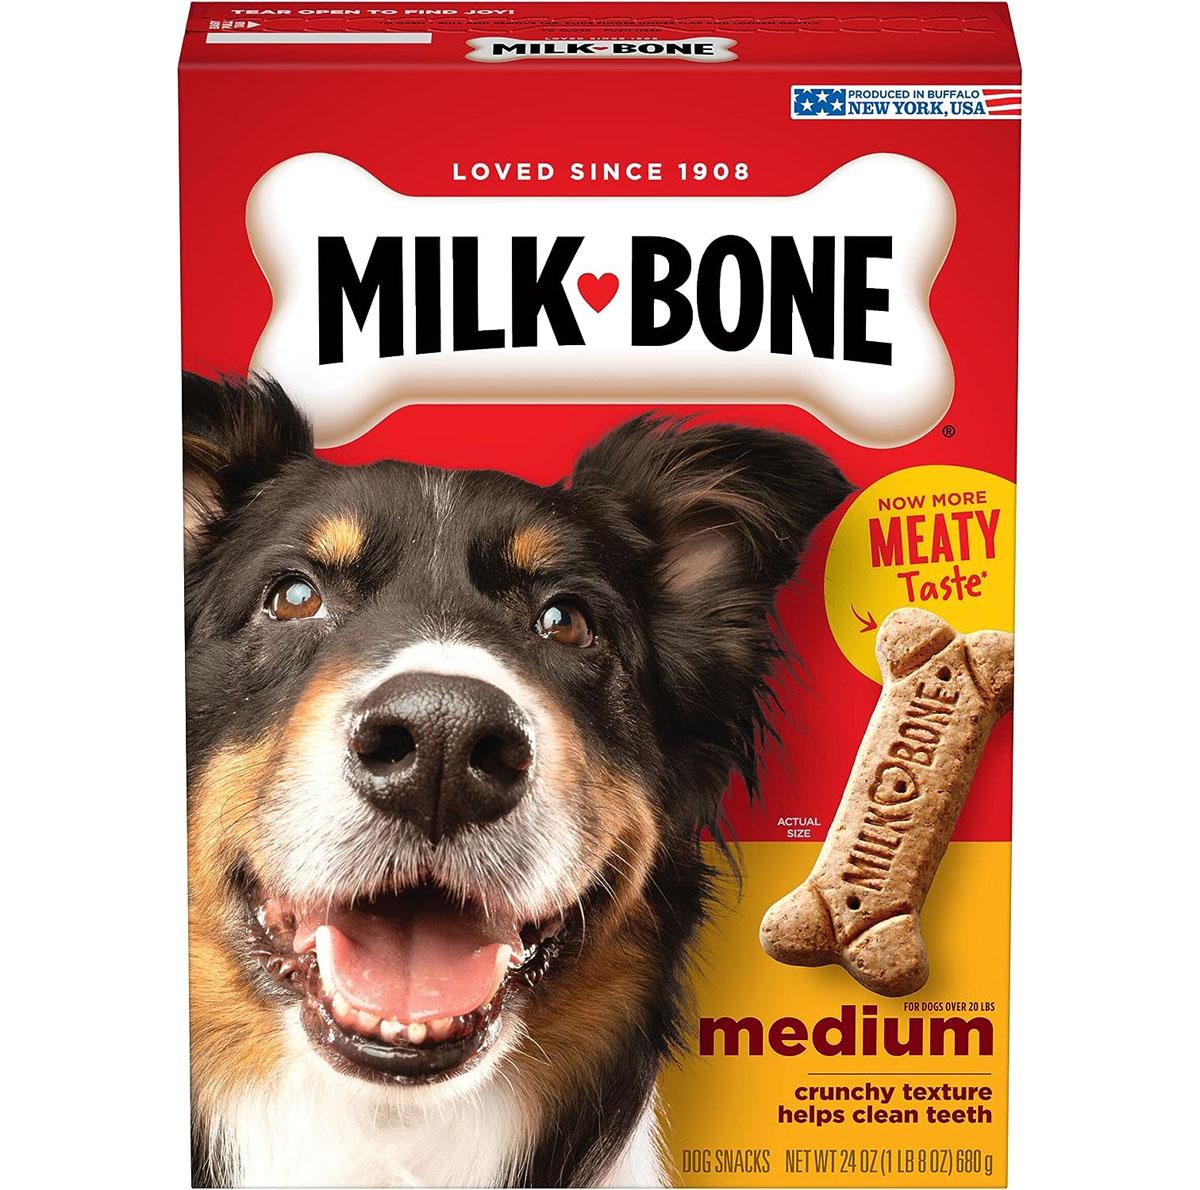 Milk-Bone Original Dog Treats Biscuits for Medium Dogs for $2.24 Shipped